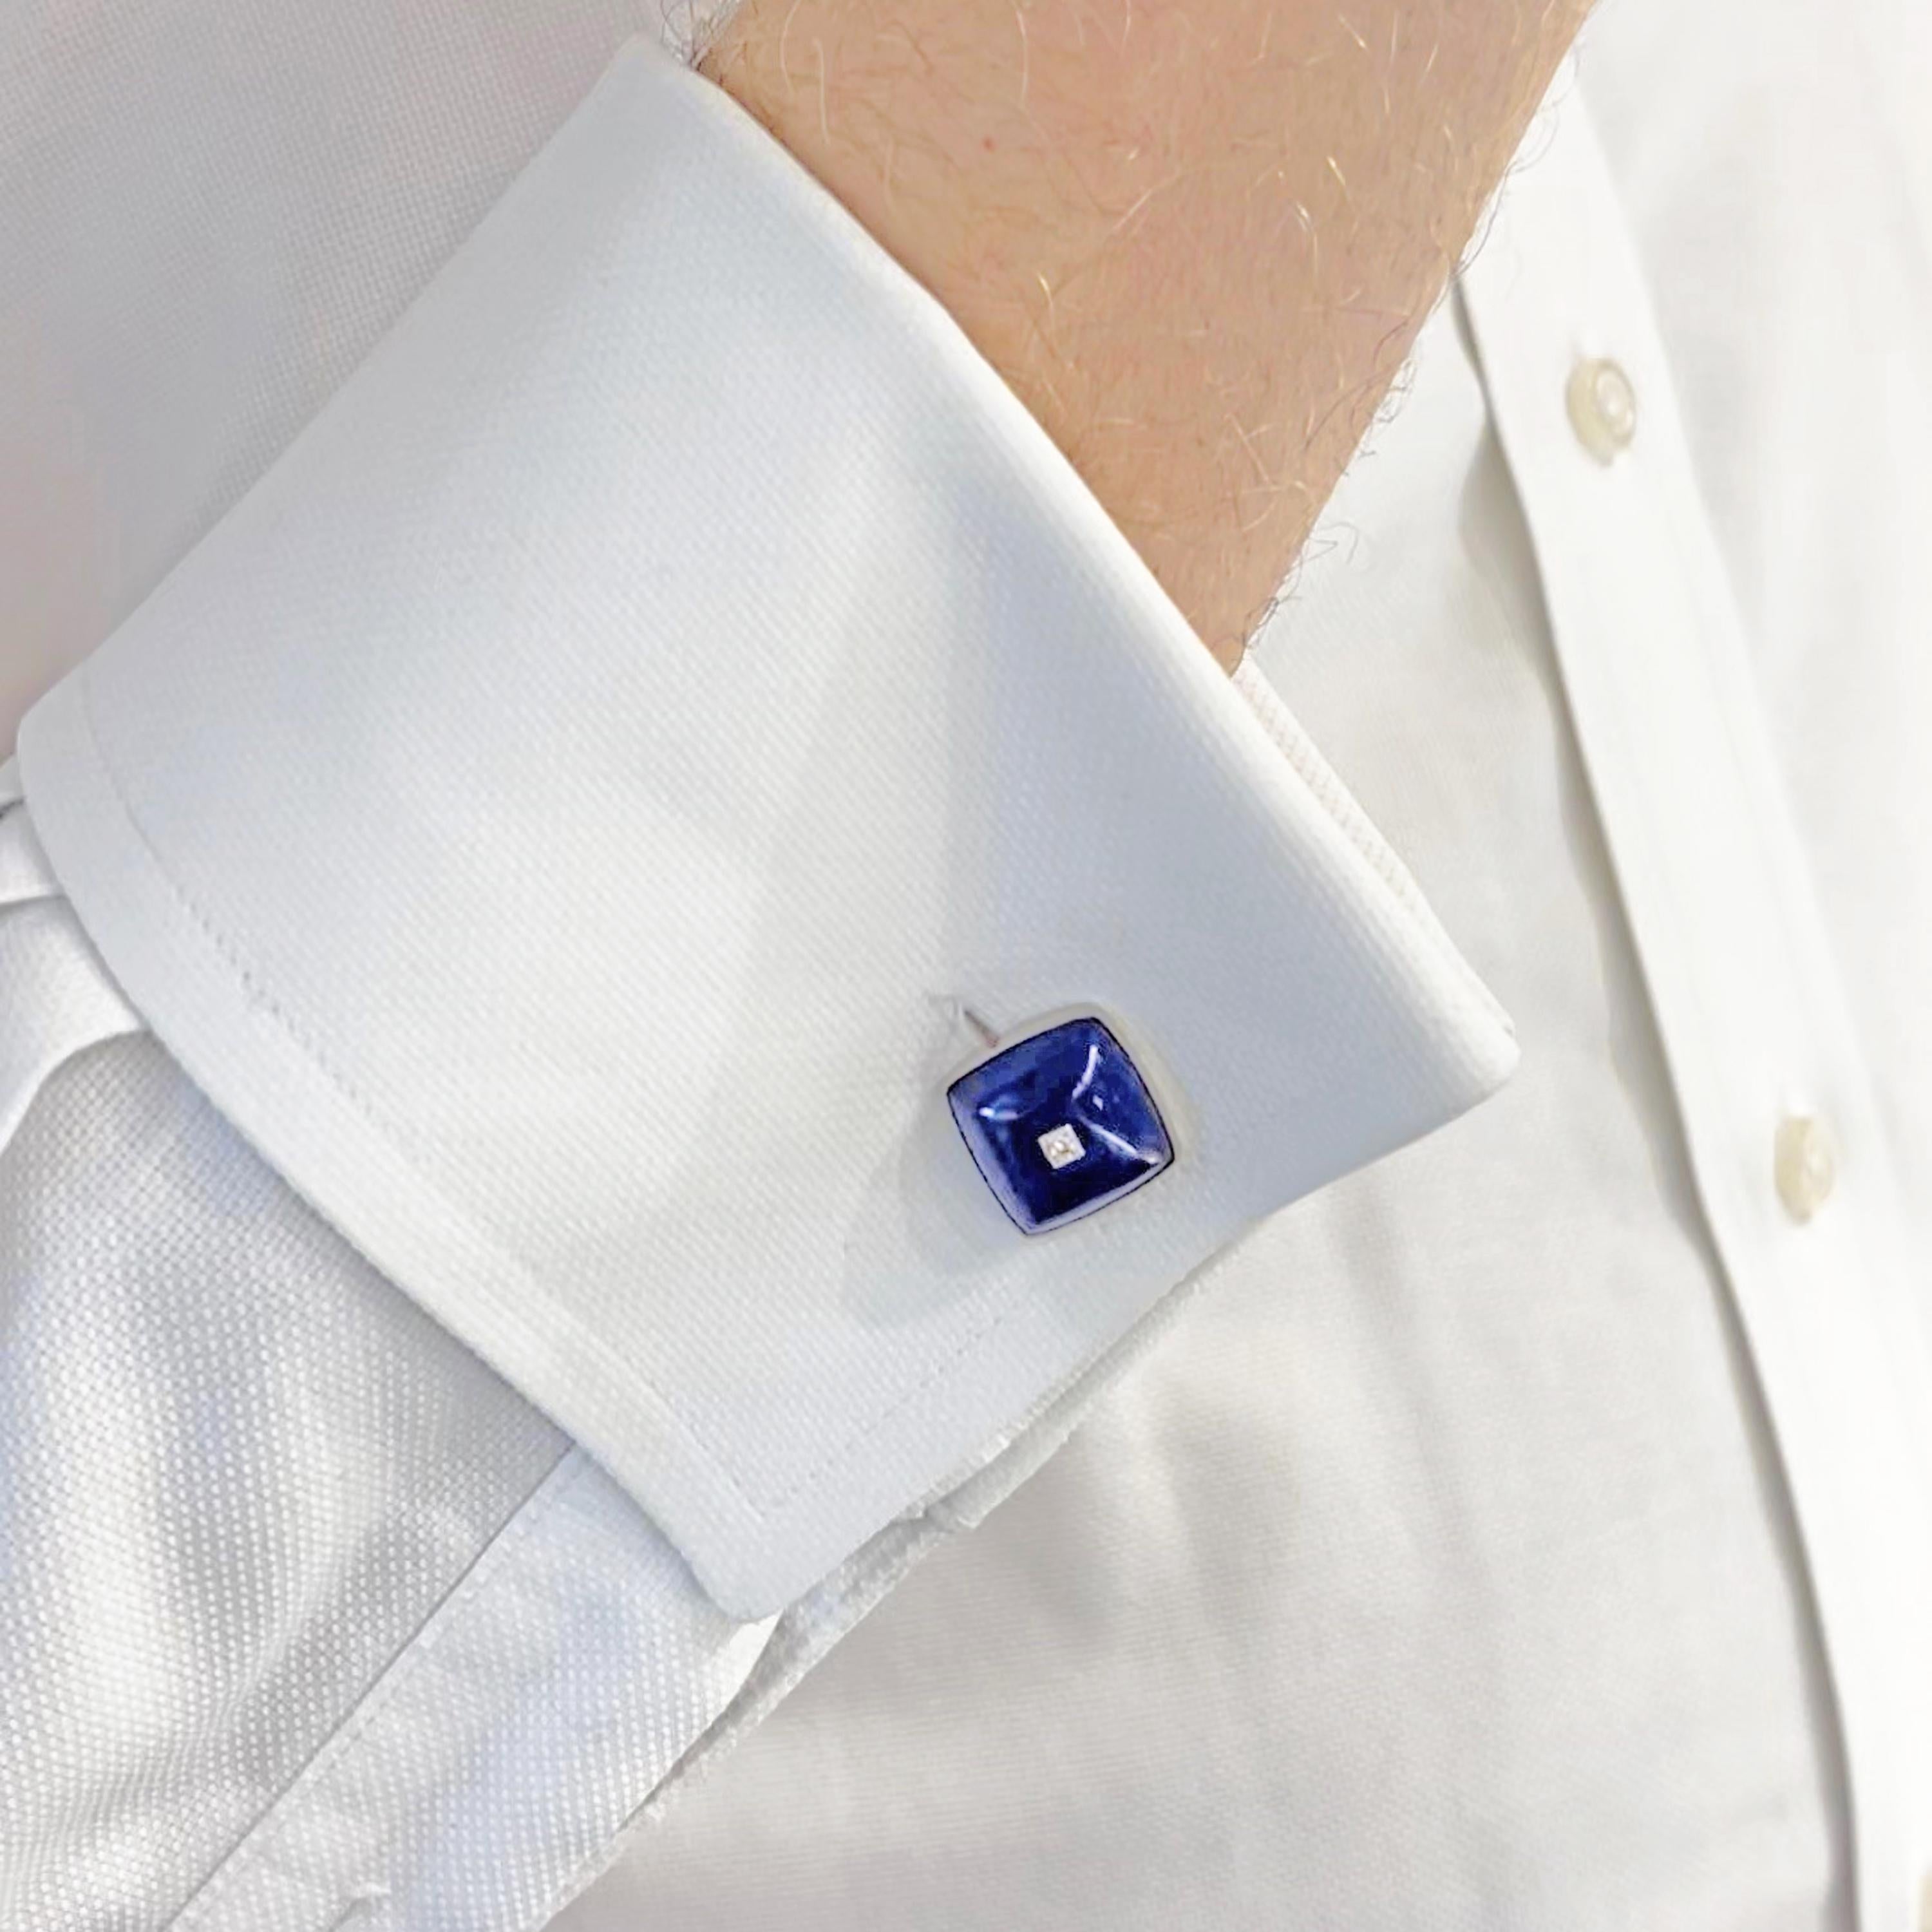 Vintage Lapis Lazuli Diamond and White Gold Cufflinks, Circa 1950 In Good Condition For Sale In London, GB